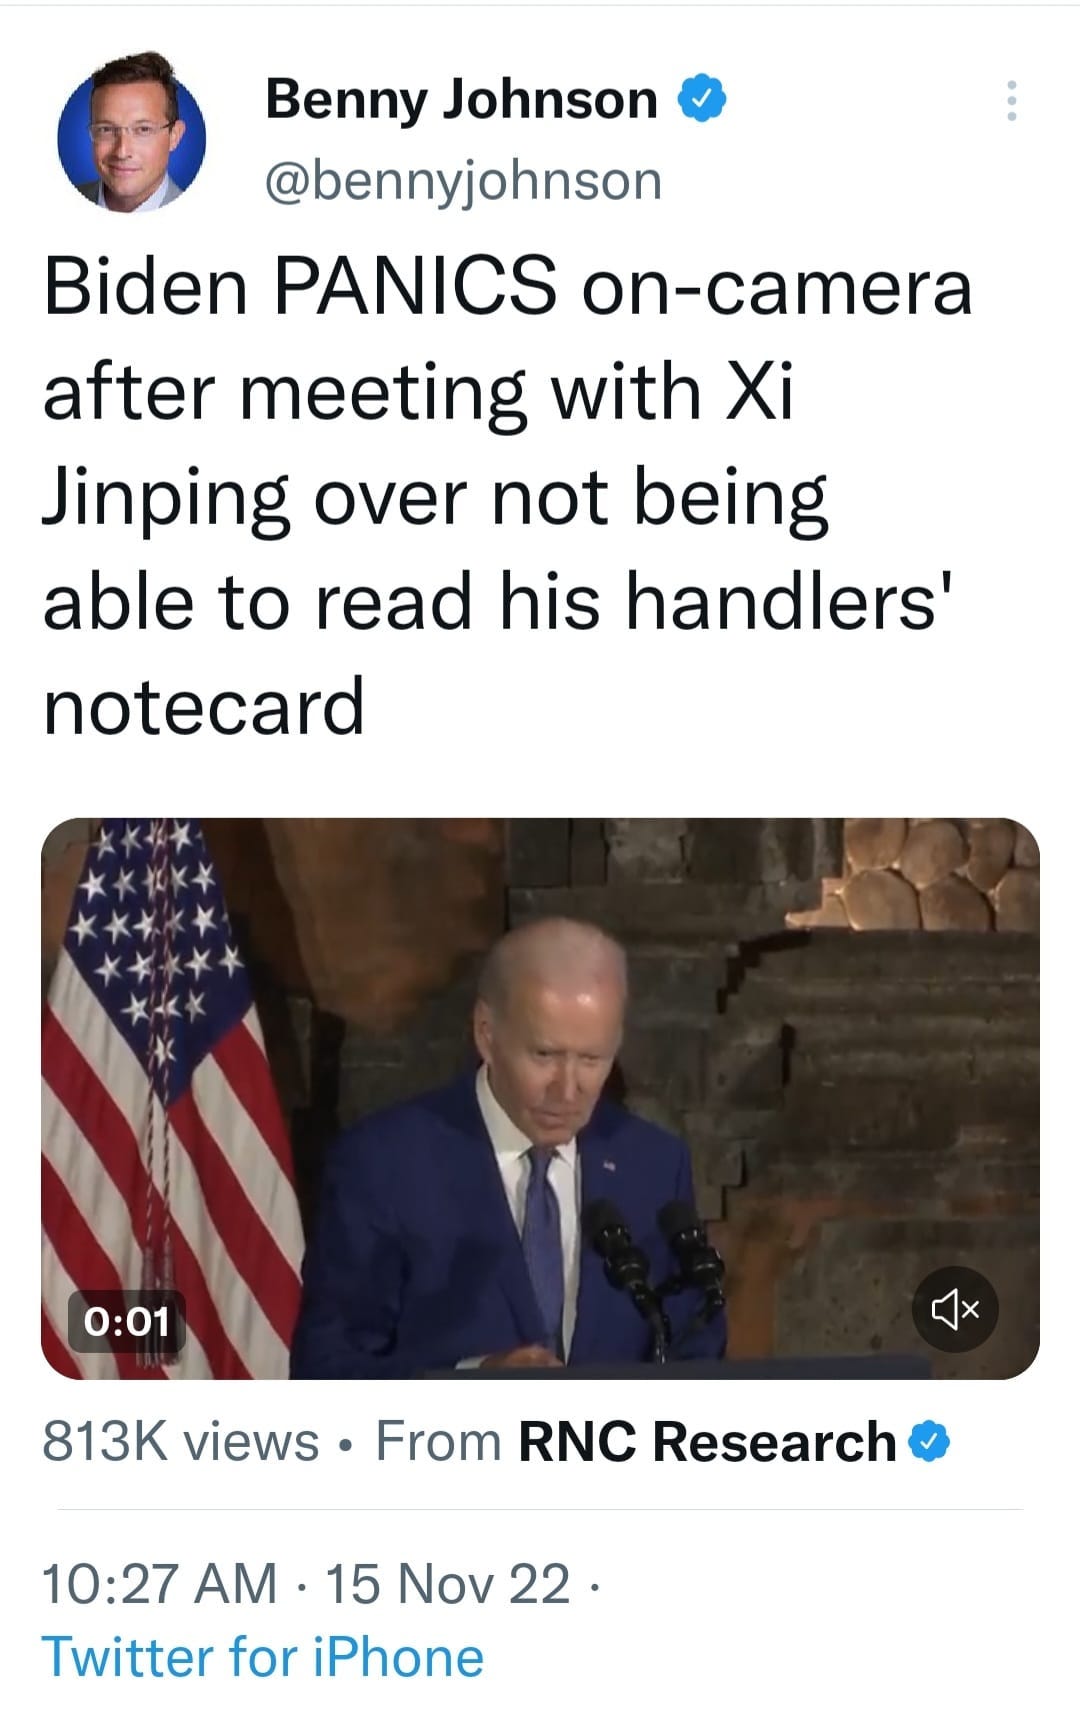 May be an image of 2 people and text that says 'Benny J Johnson @bennyjohnson Biden PANICS on-camera after meeting with Xi Jinping over not being able to read his handlers' notecard 0:01 813K views. From RNC Research 10:27 AM 15 Nov 22 Twitter for Phone'